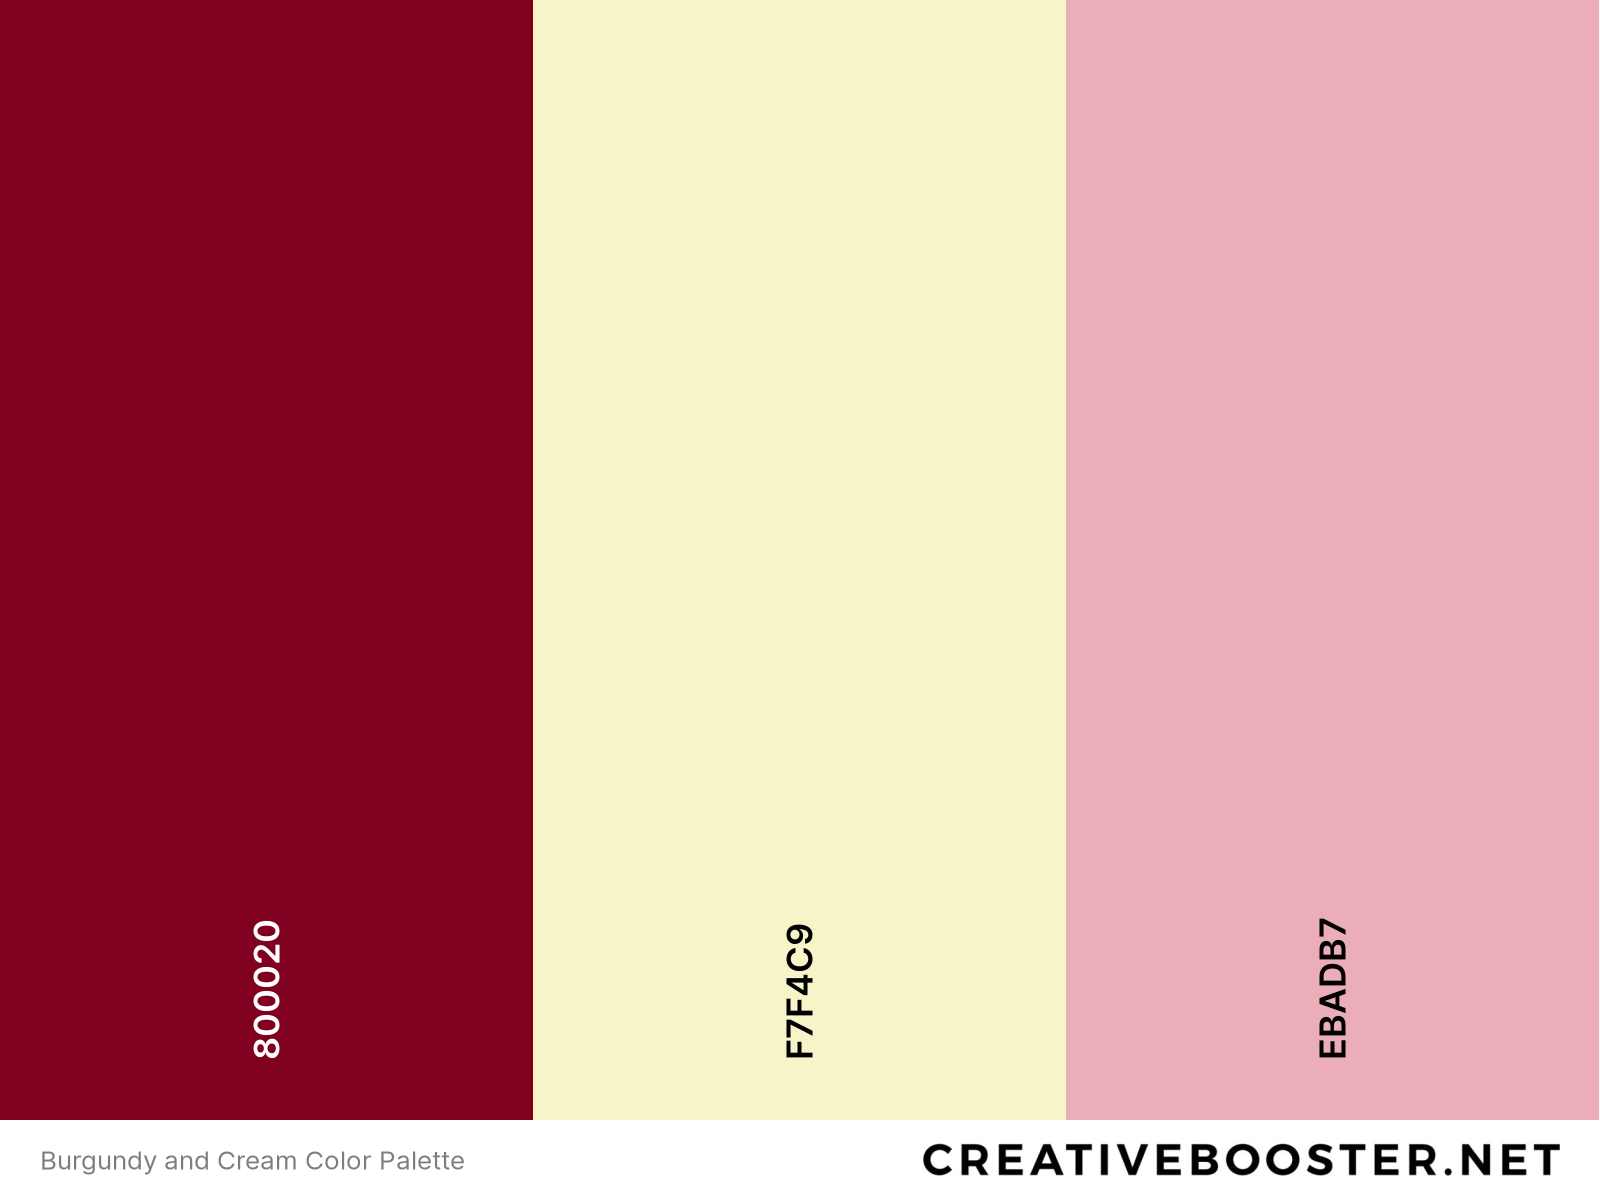 Burgundy and Cream Color Palette